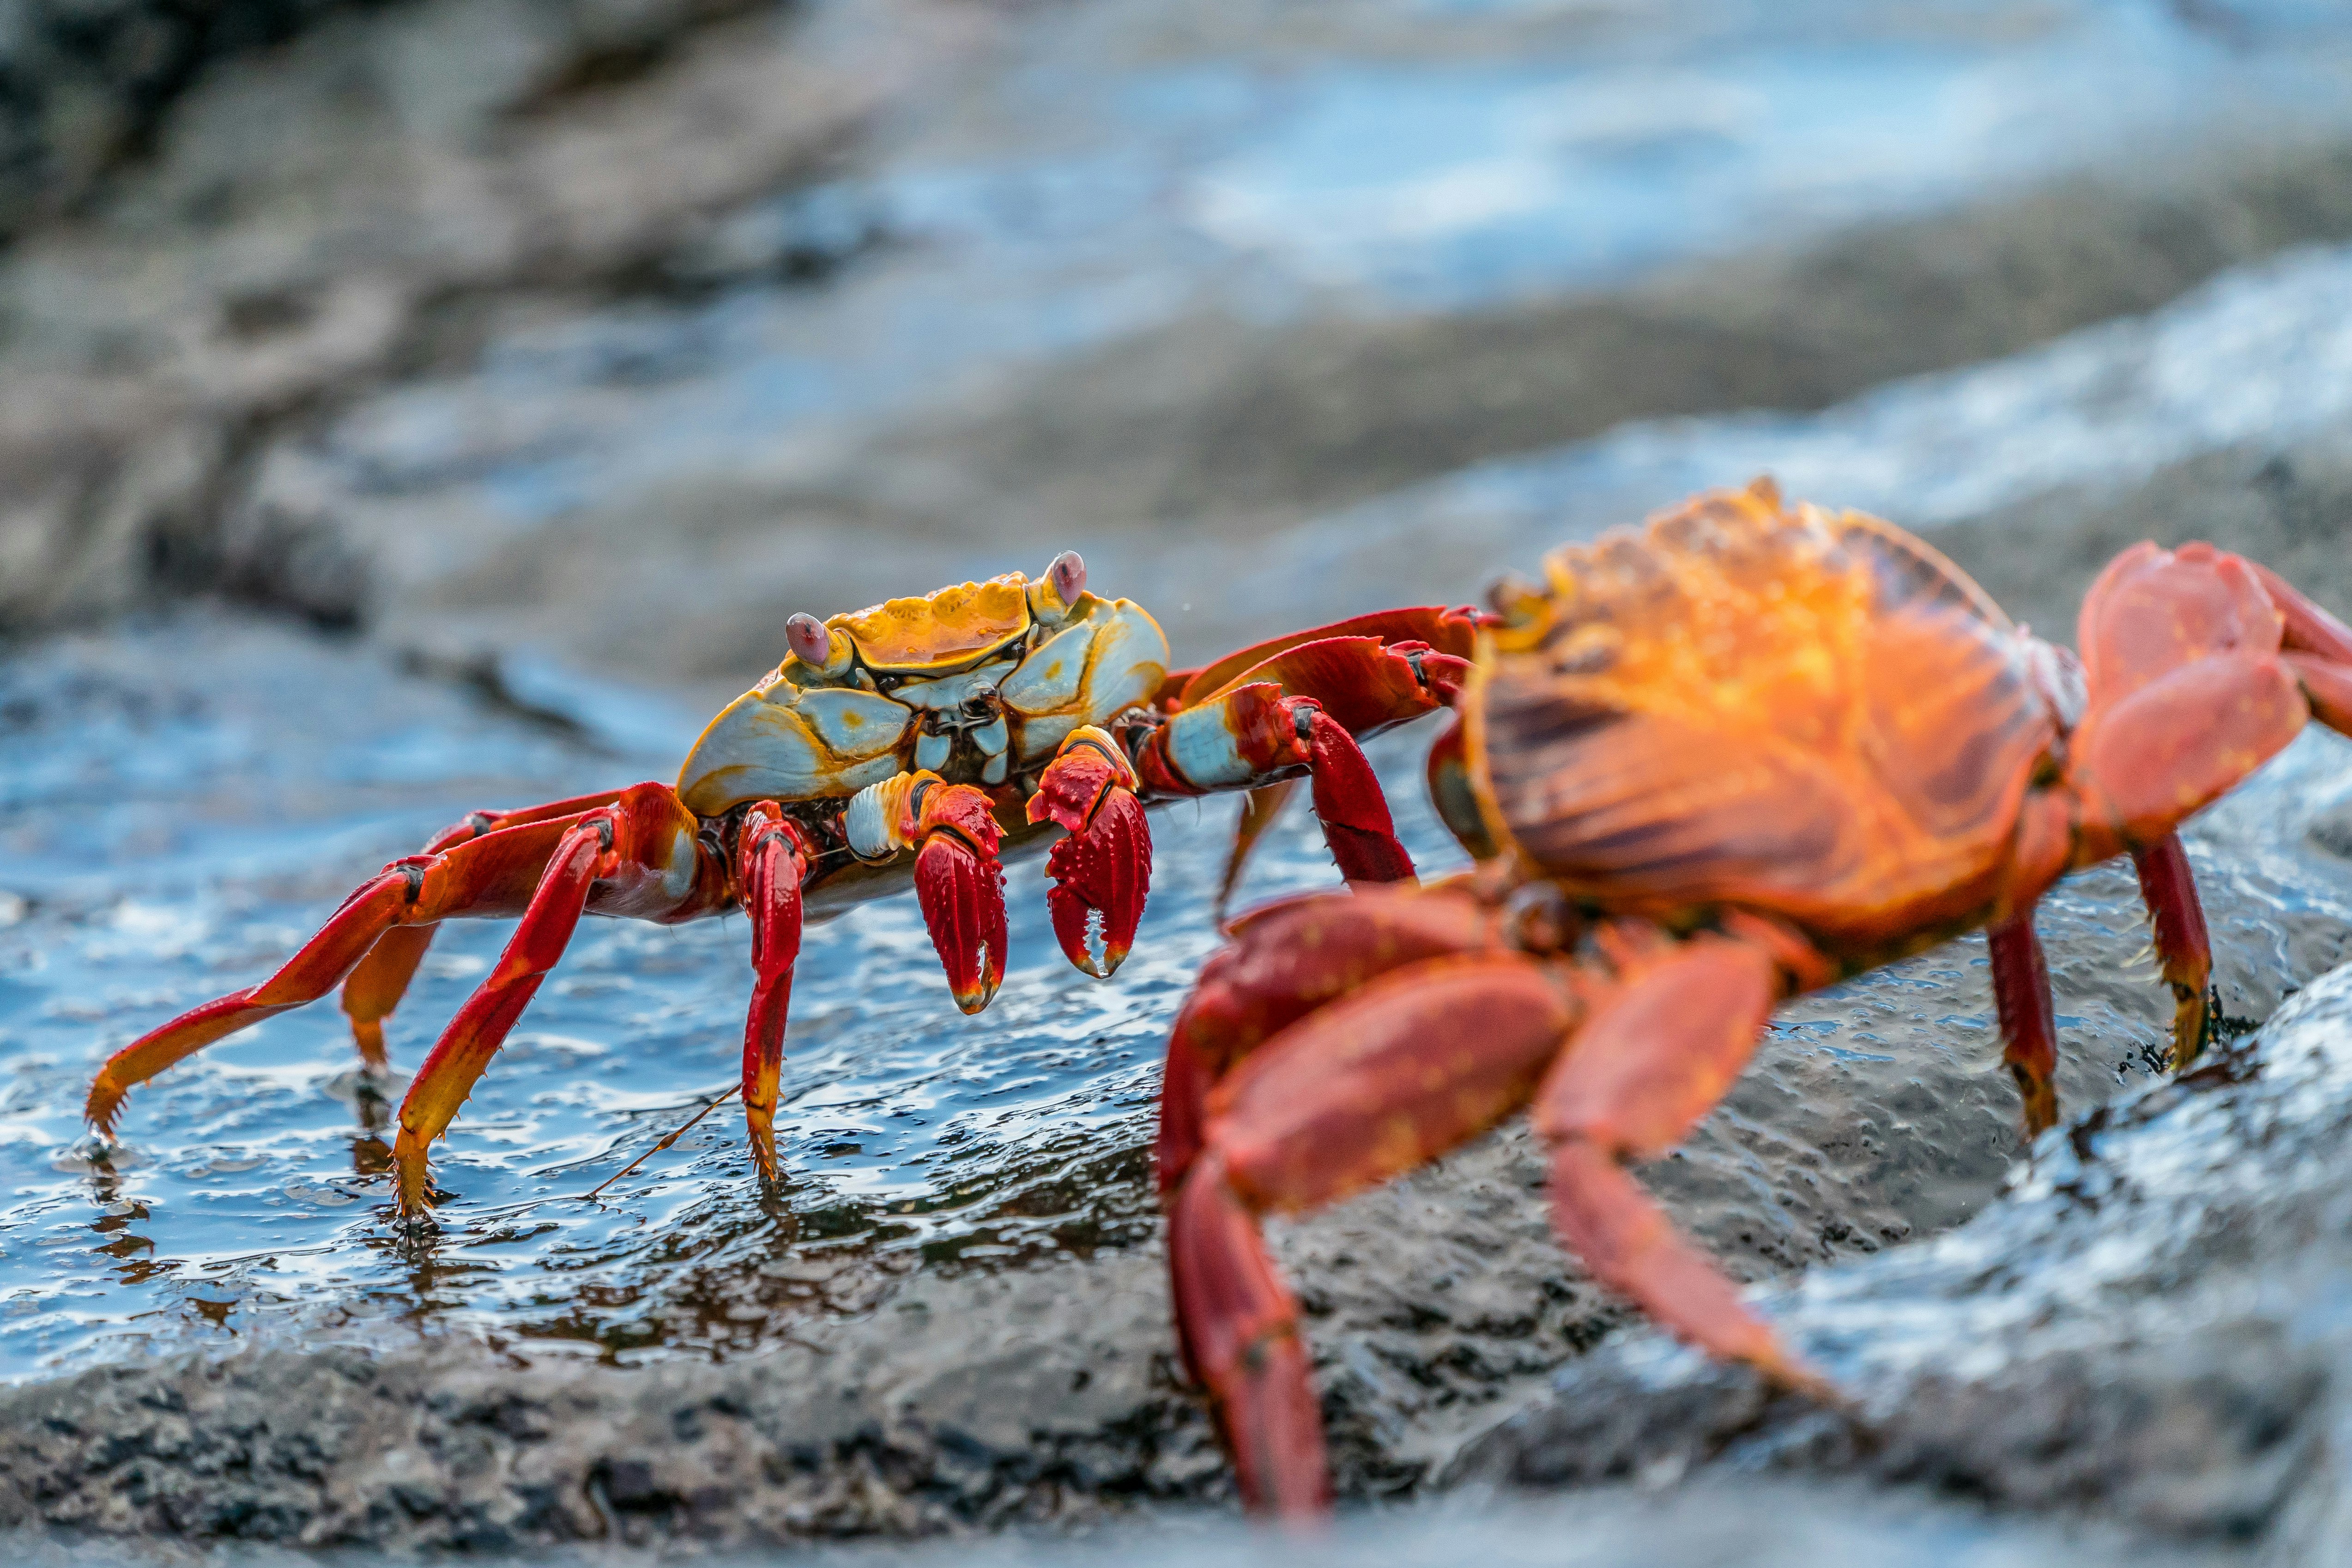 One of the highlights of a trip to the Galapagos Islands is to see these brightly coloured Sally Lightfoot crabs … apparently named after a Caribbean dancer.  They can jump from rock to rock as well which is interesting to watch … but these two were motionless - facing off against each other, determined not to move out of each others way.